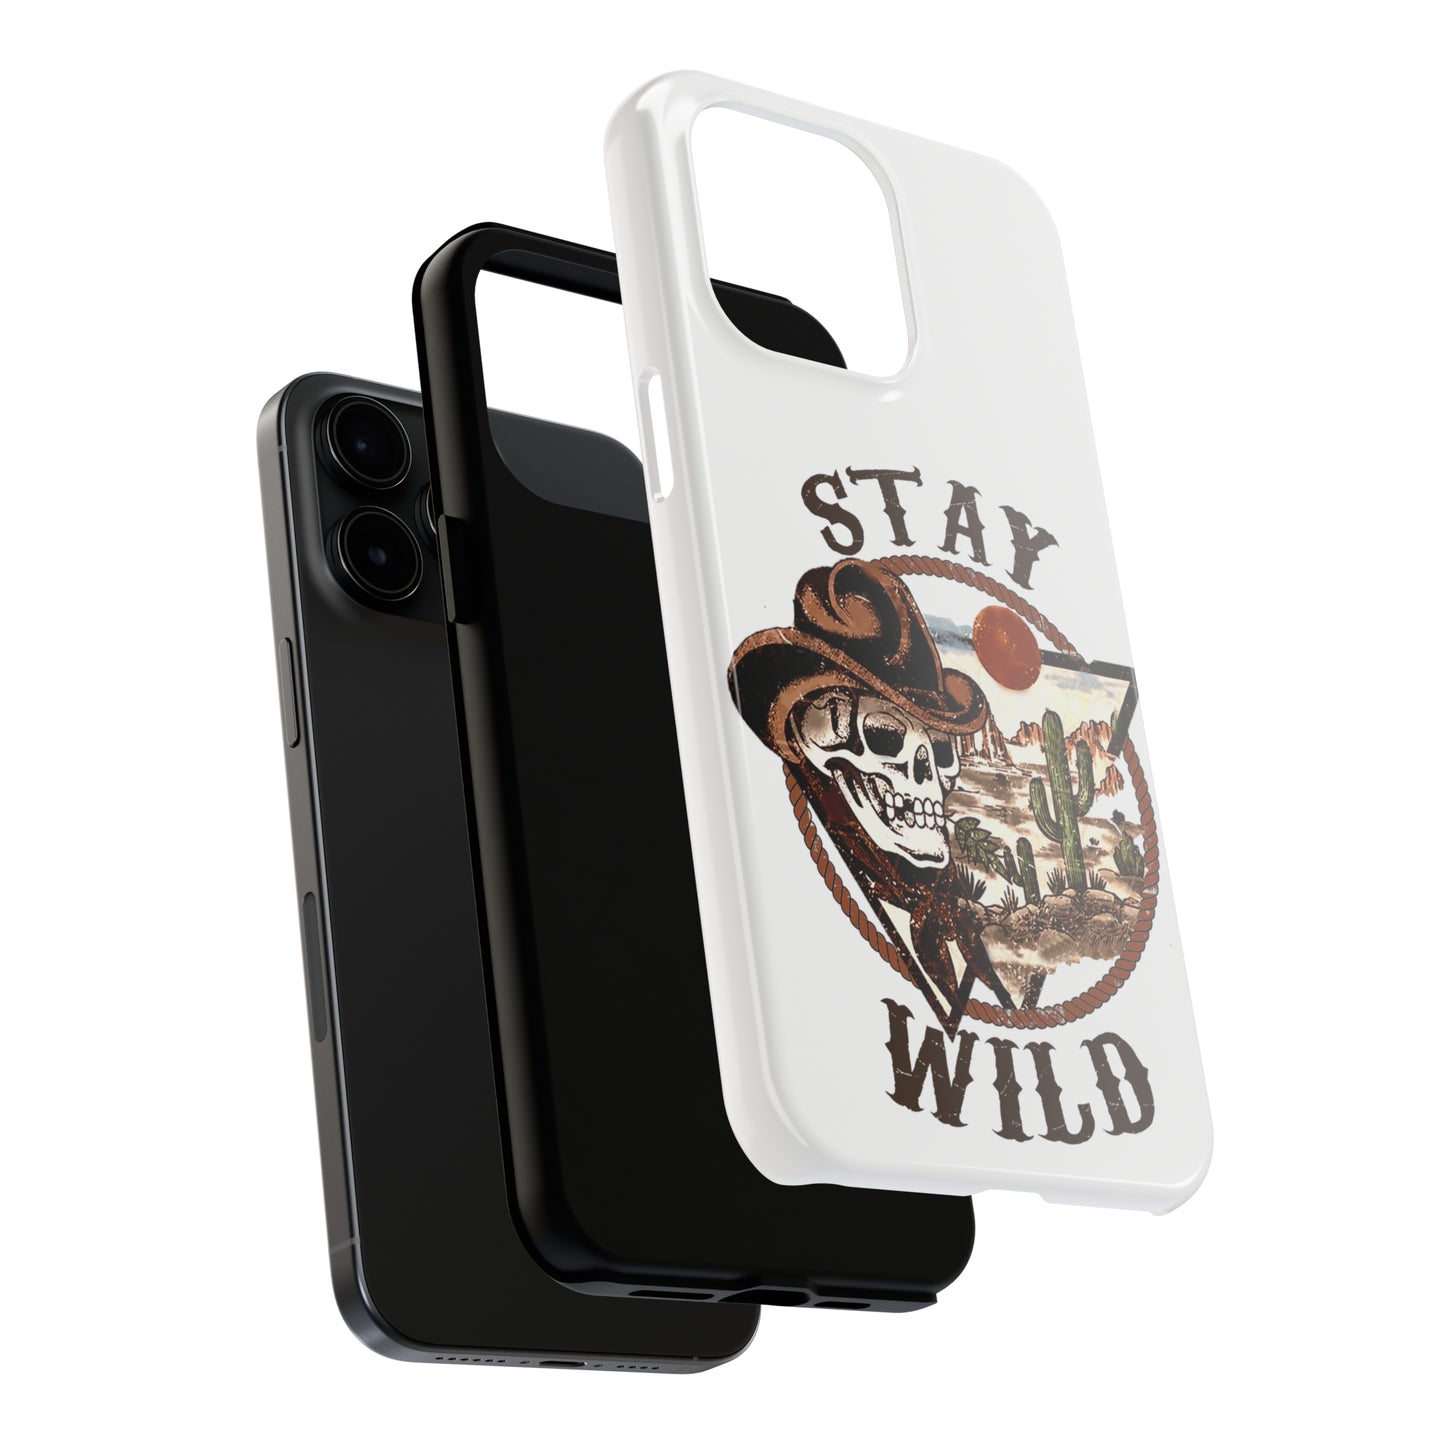 Stay Wild Cowboy Skull: iPhone Tough Case Design - Wireless Charging - Superior Protection - Original Designs by TheGlassyLass.com